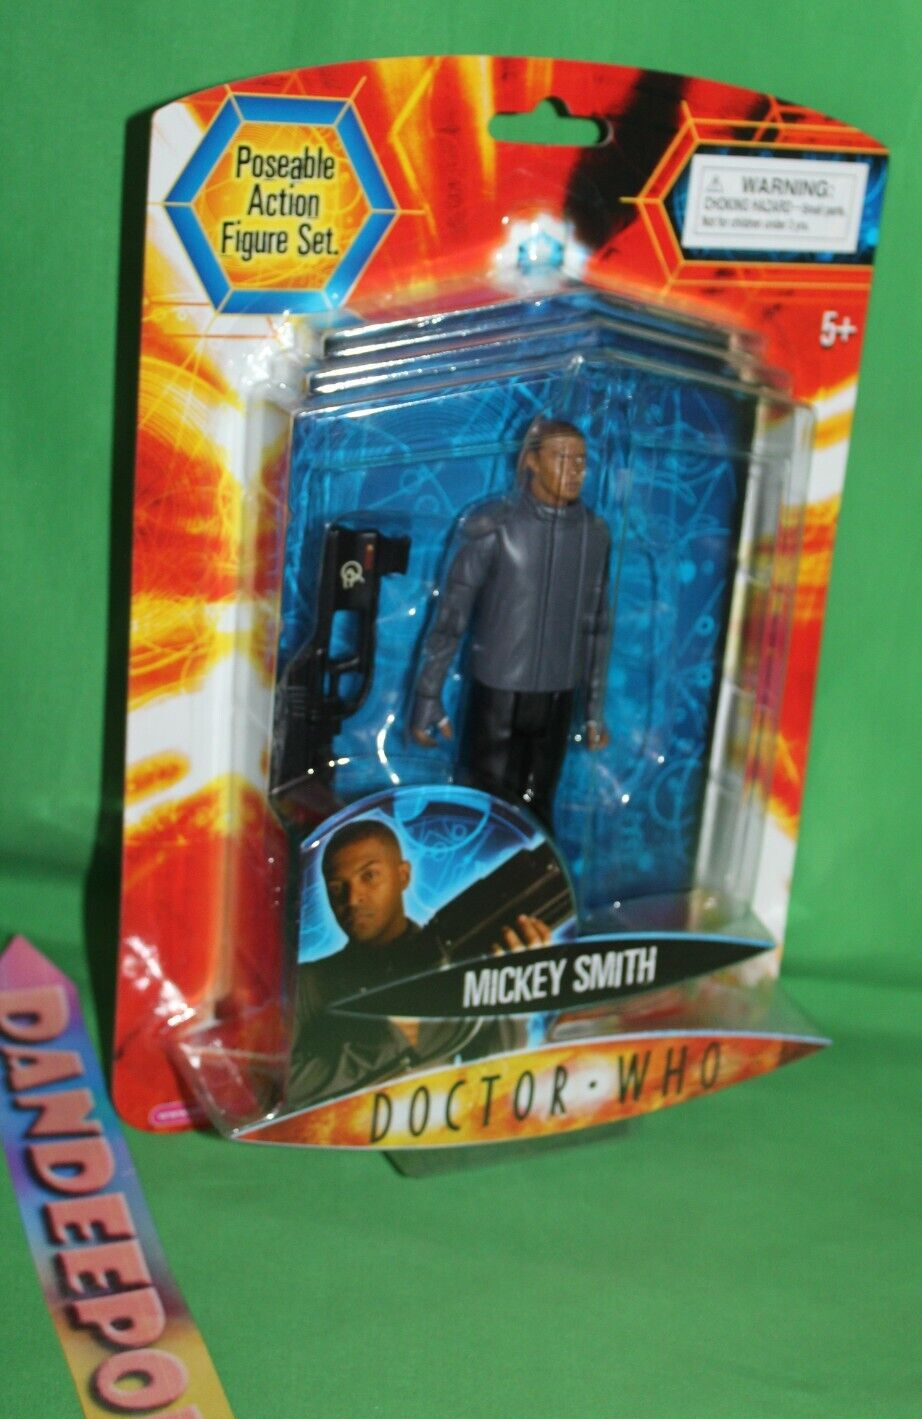 Primary image for BBC Doctor Who Mickey Smith Series 2 Poseable Action Figure Set Toy 02374